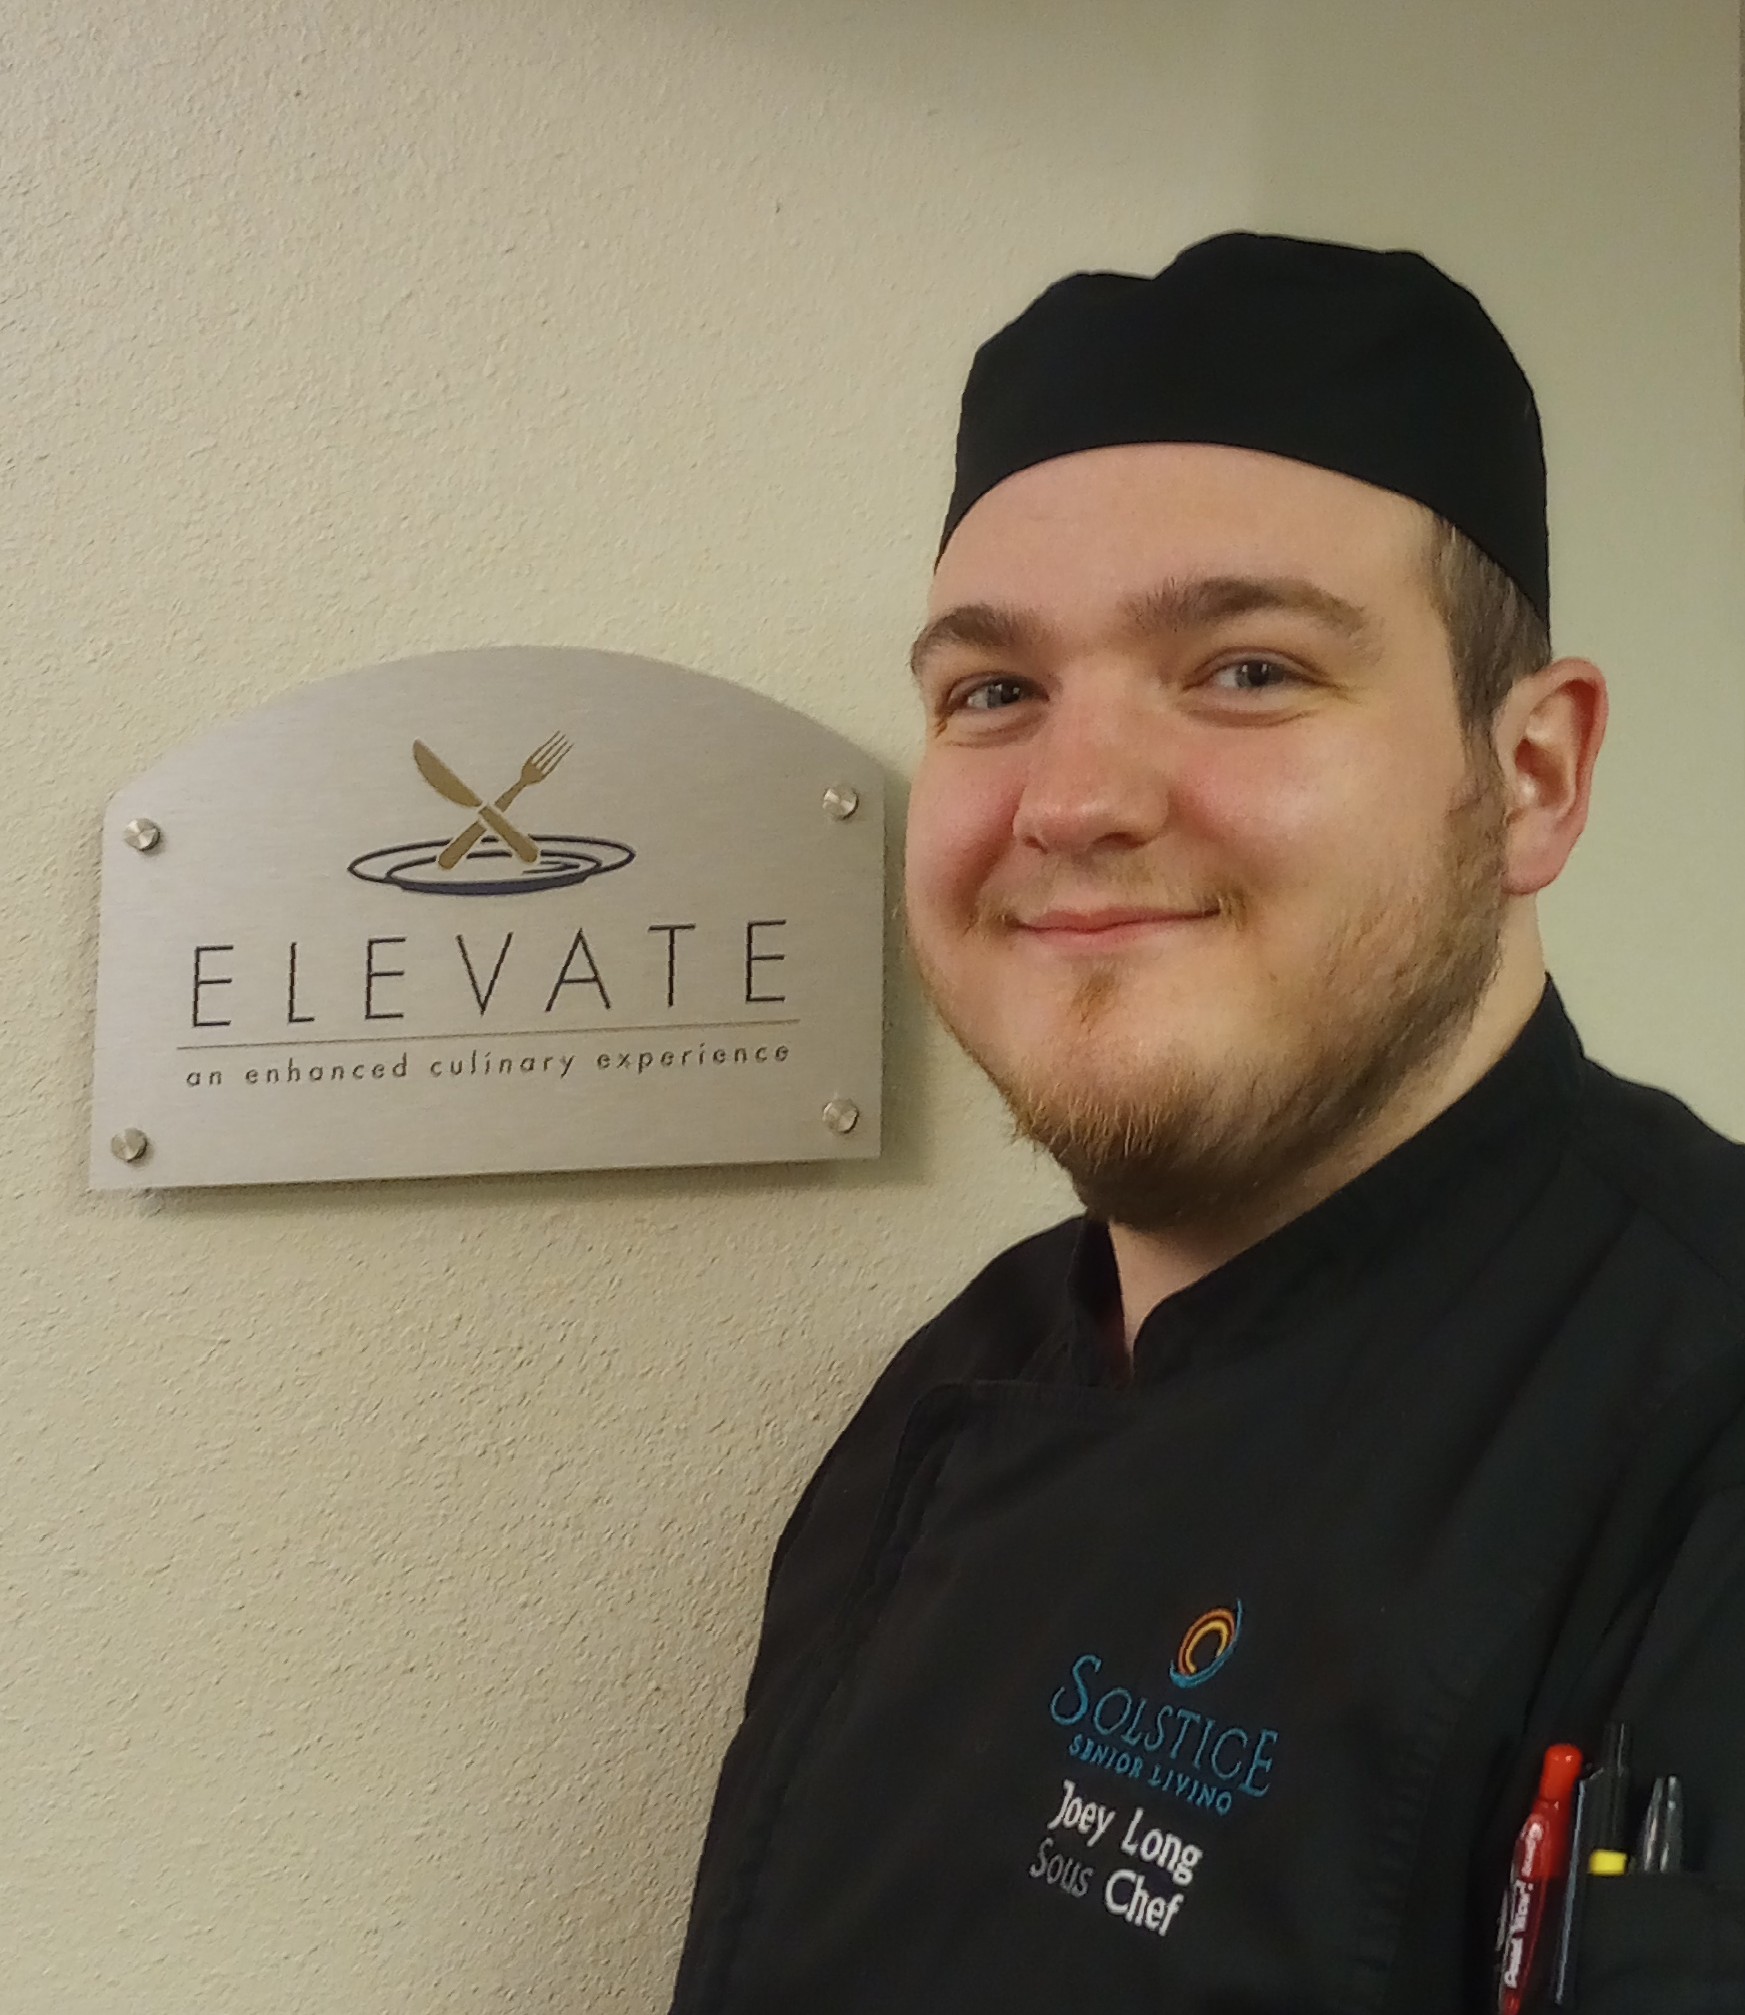 Joey Long, Culinary Services Director, Solstice at Grand Valley